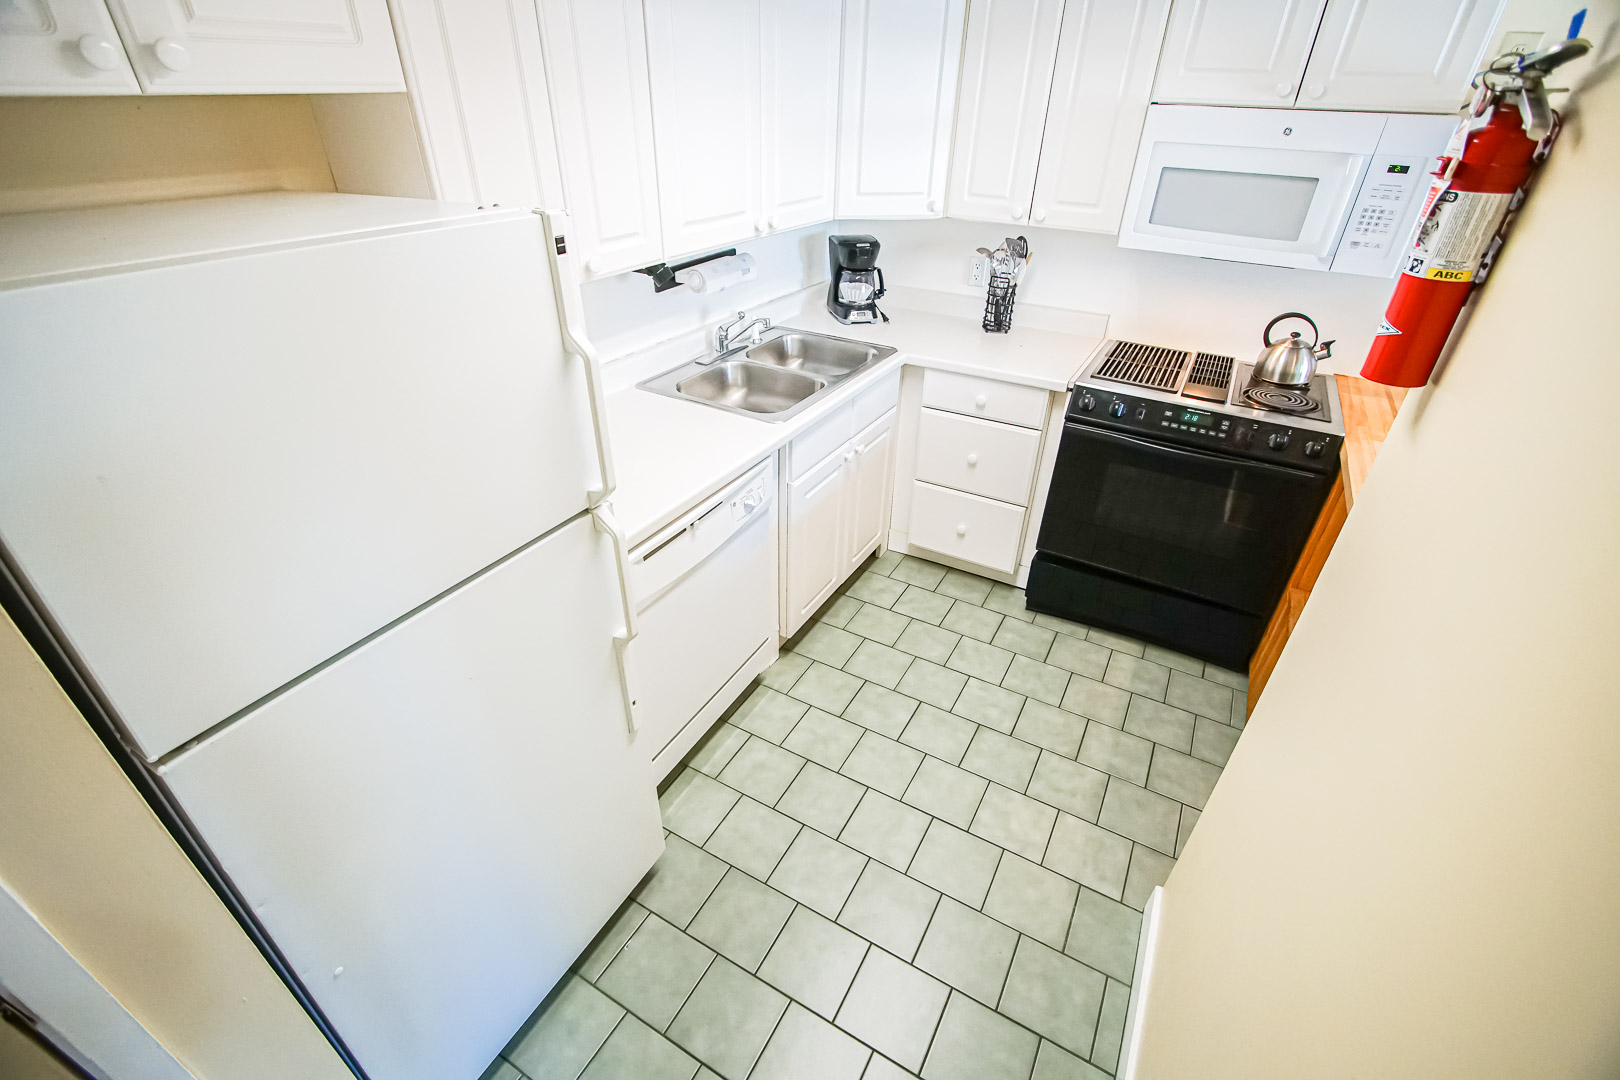 A clean kitchen area at VRI's Village of Loon Mountain in New Hampshire.